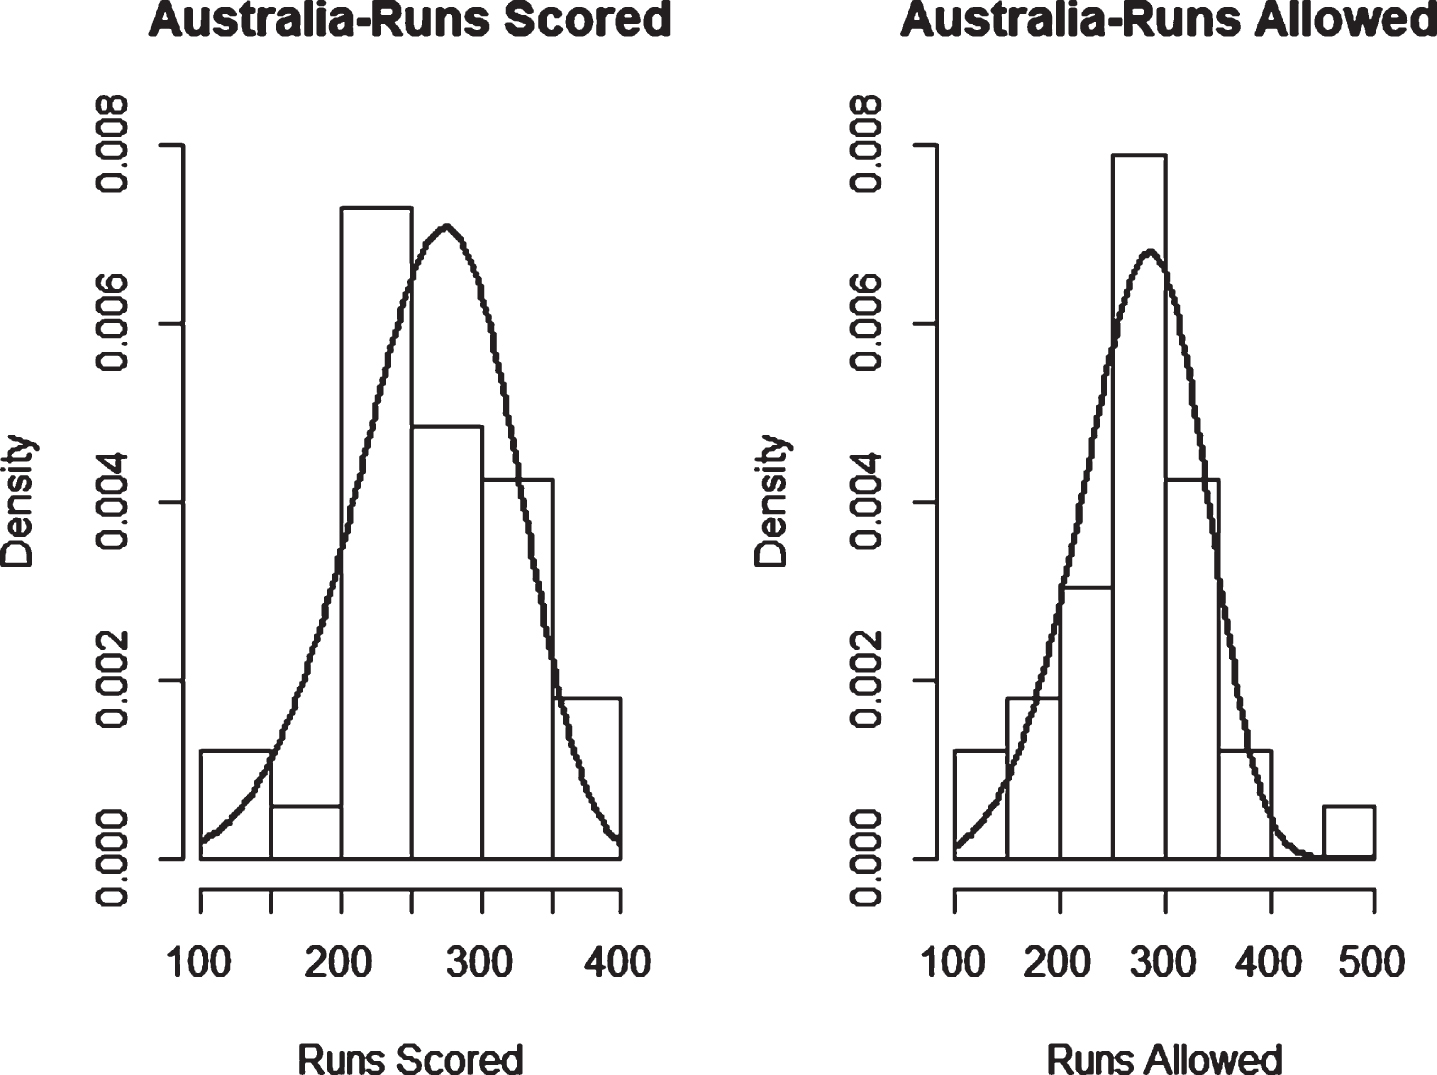 Weibull Distribution Fit for Runs Scored and Runs Allowed for Australia using Least Squares Method (ODI).